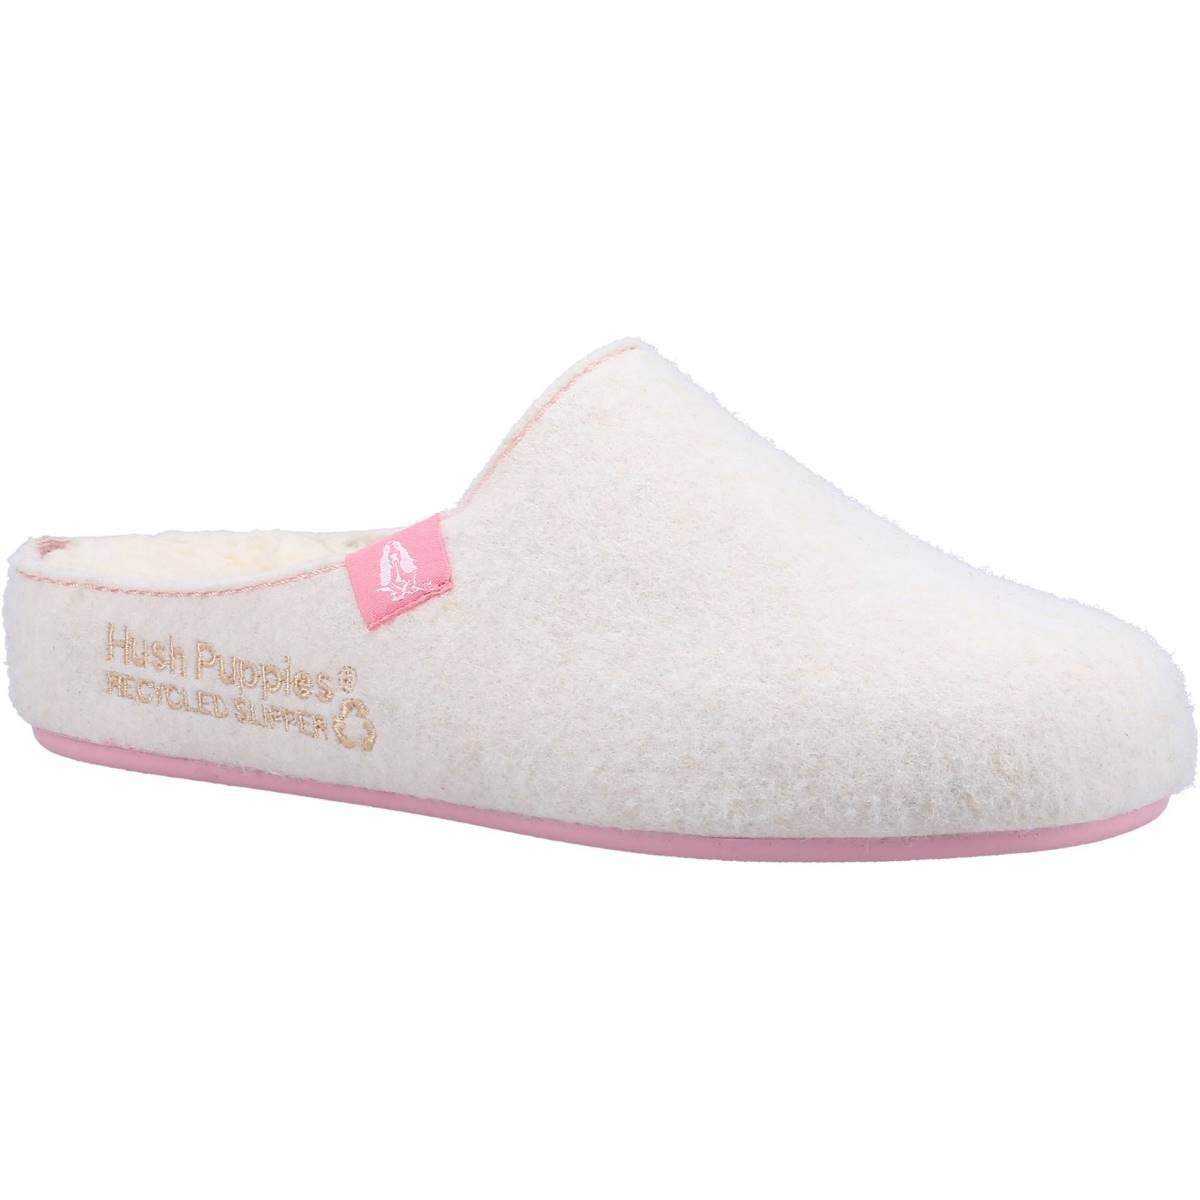 Hush Puppies The Good Slipper Beige Womens slippers HPW1000-189-5 in a Plain Textile in Size 7